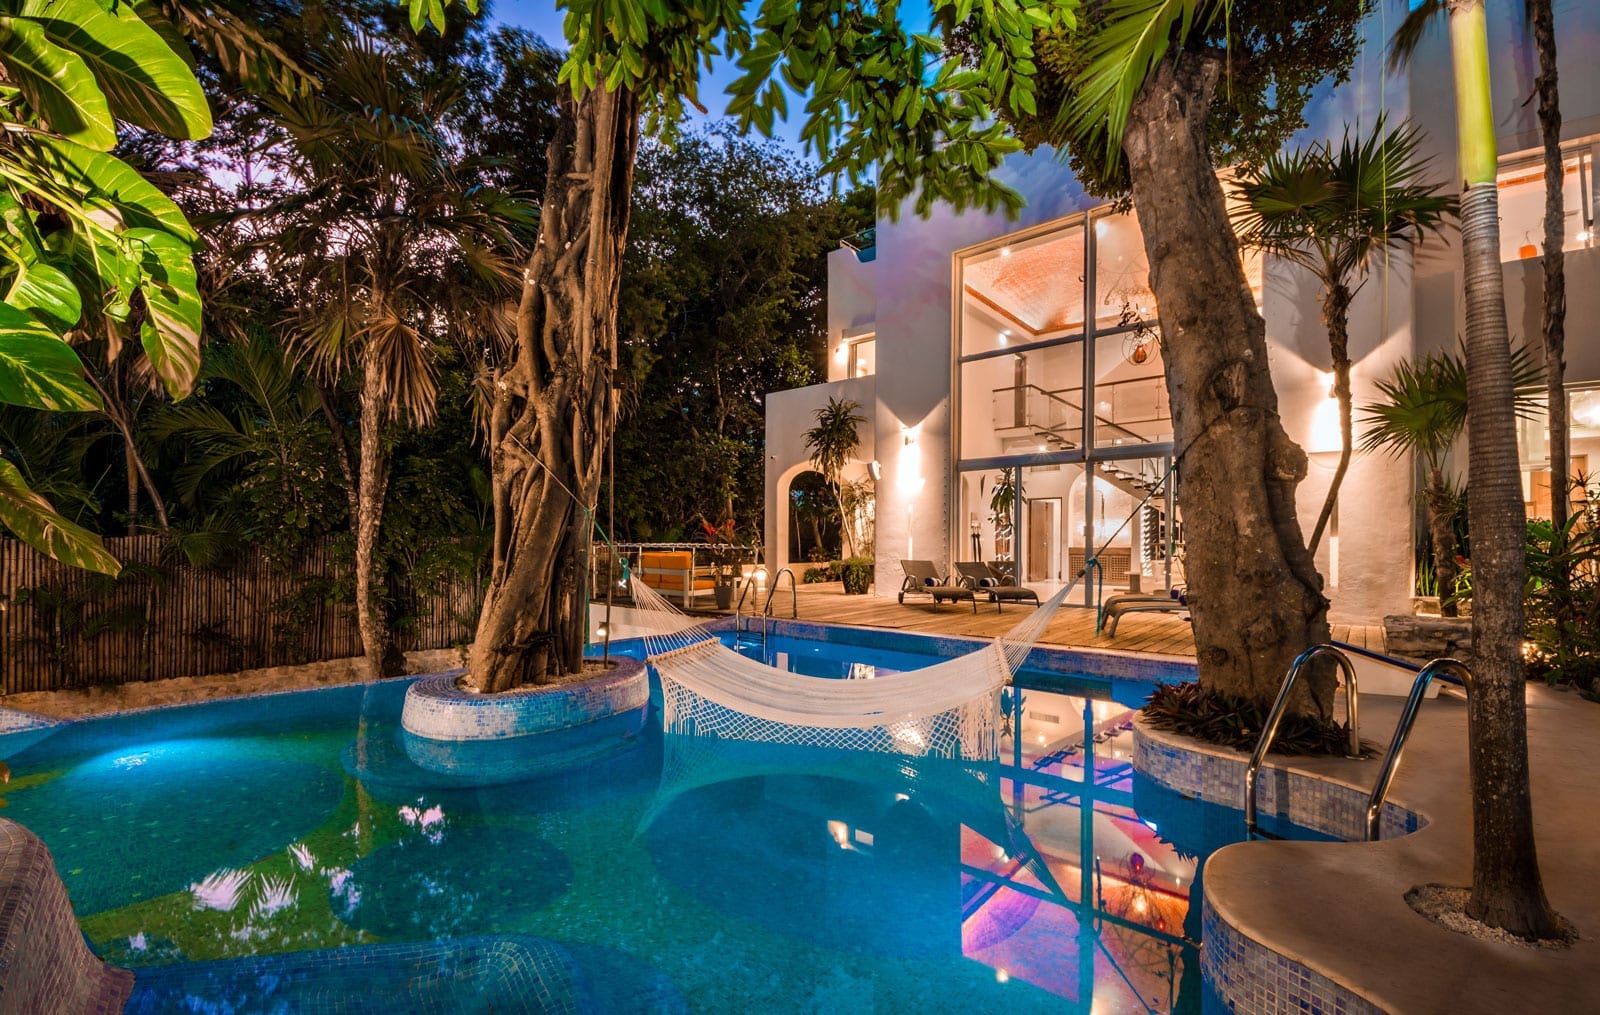 Exterior view of Casa Los Charcos in Playacar Phase 1, highlighting its pristine swimming pool and surrounded by lush tropical vegetation.